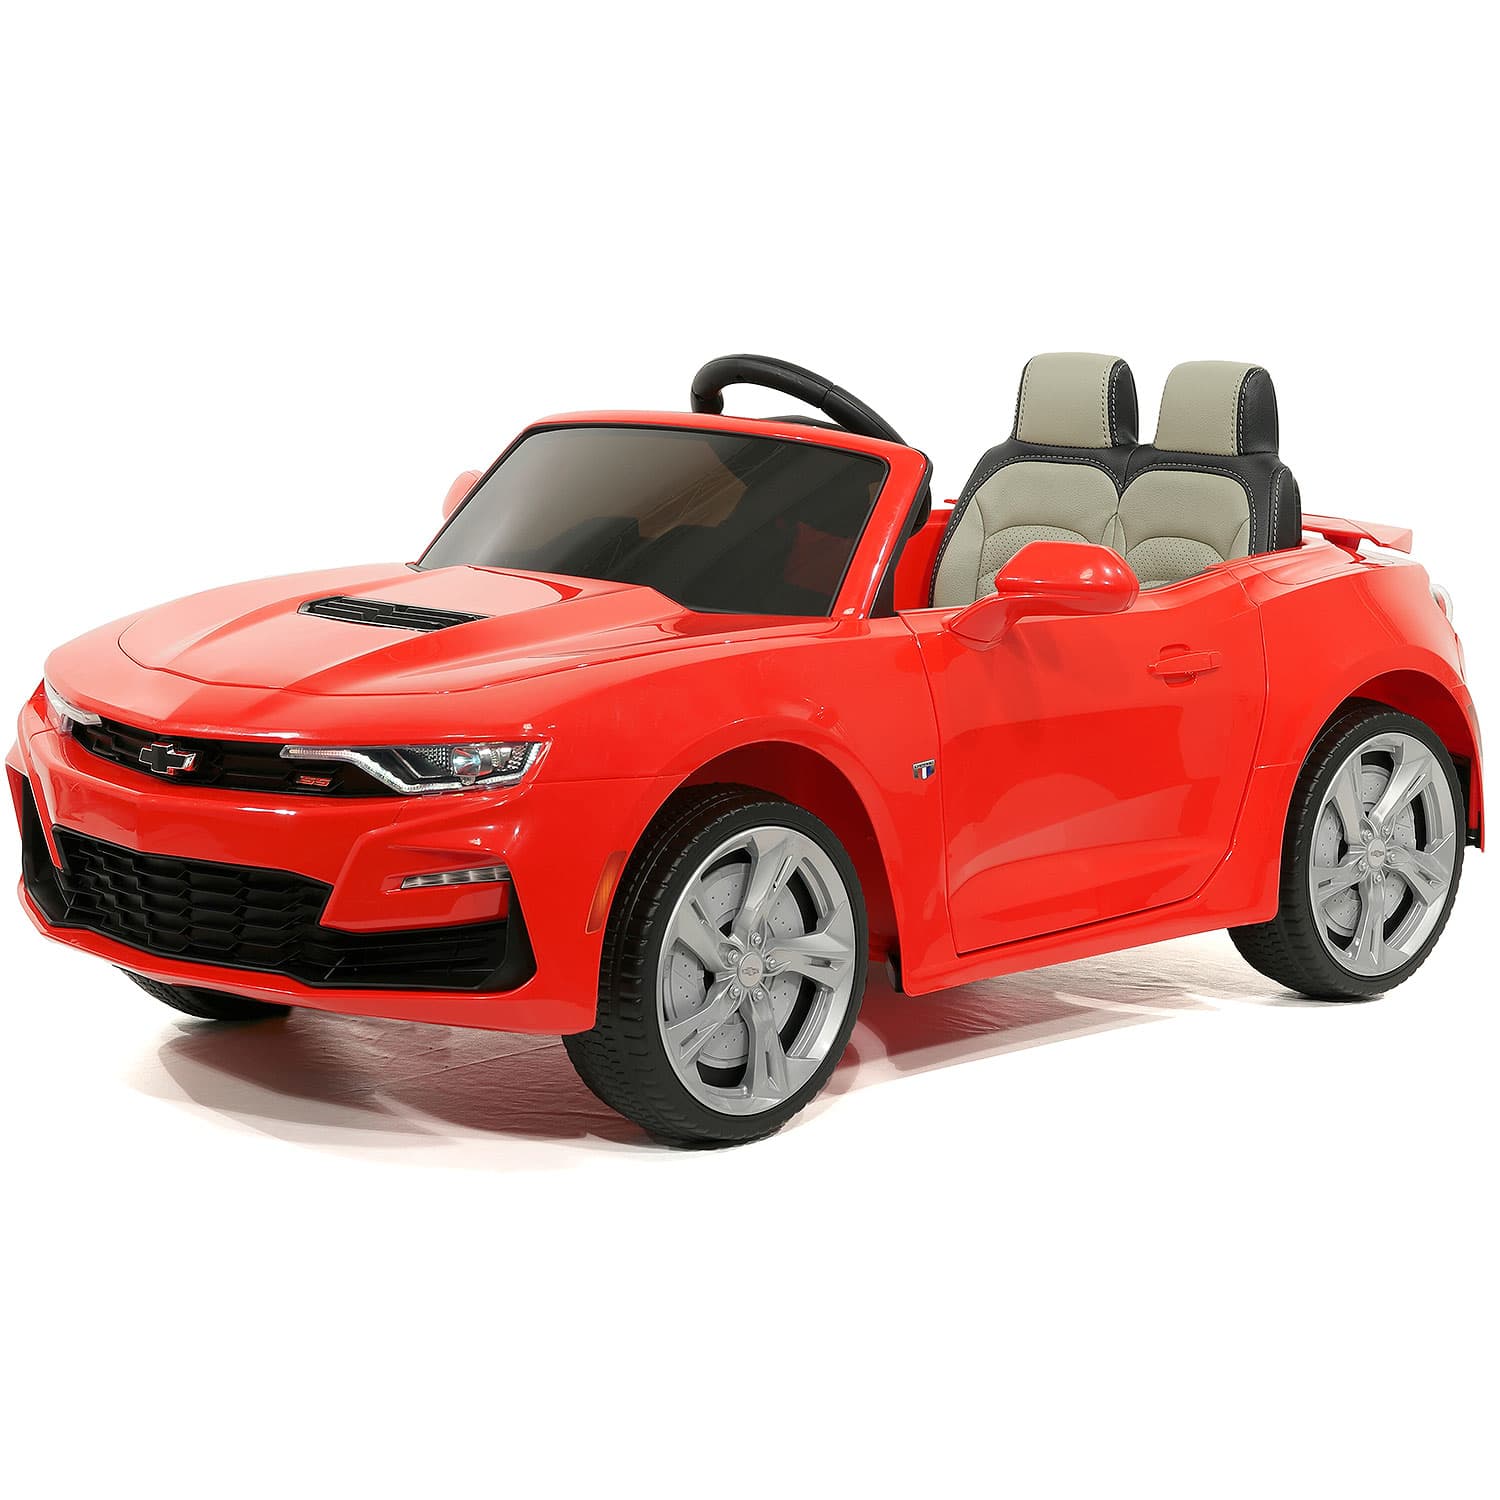 Chevrolet Camaro Ss 12v Kids Ride-on Car With Parental Remote Control | Red